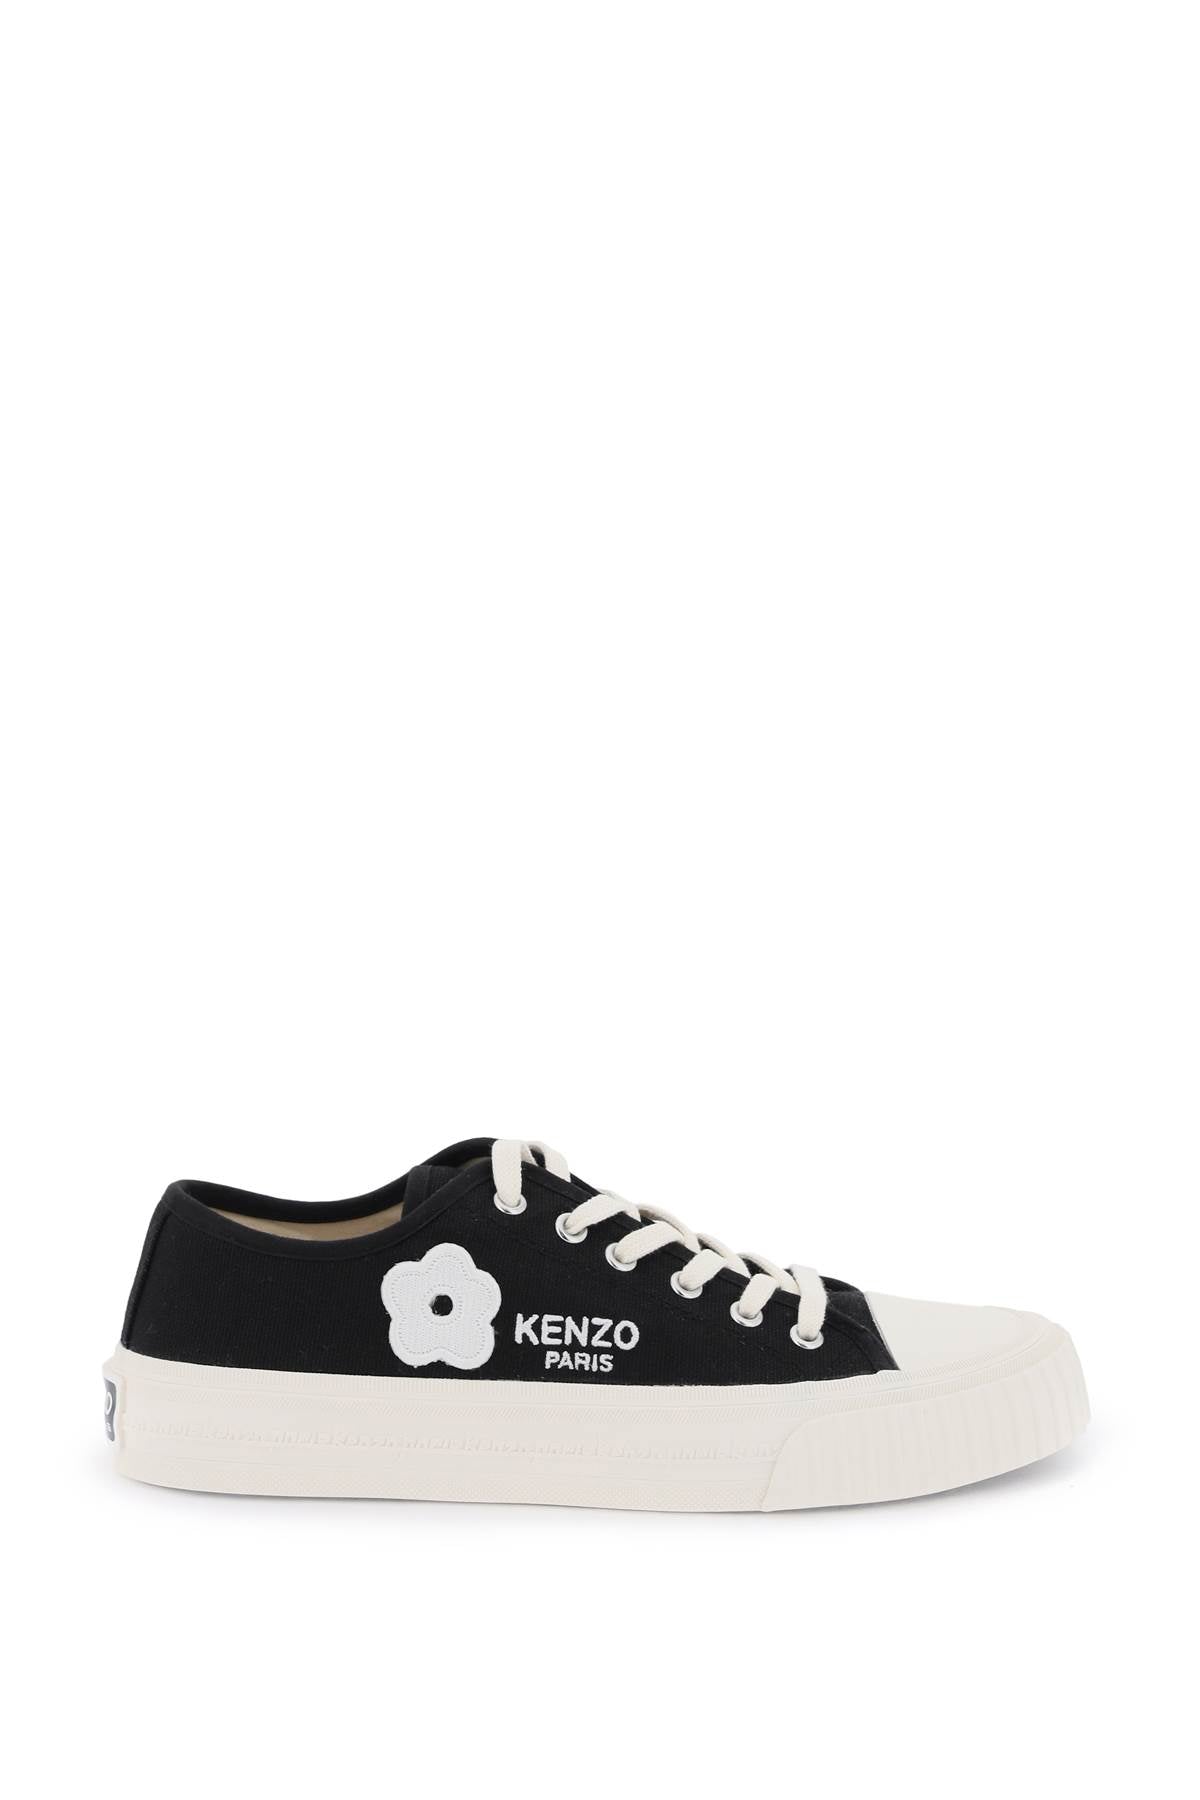 Kenzo foxy canvas sneakers for stylish-0